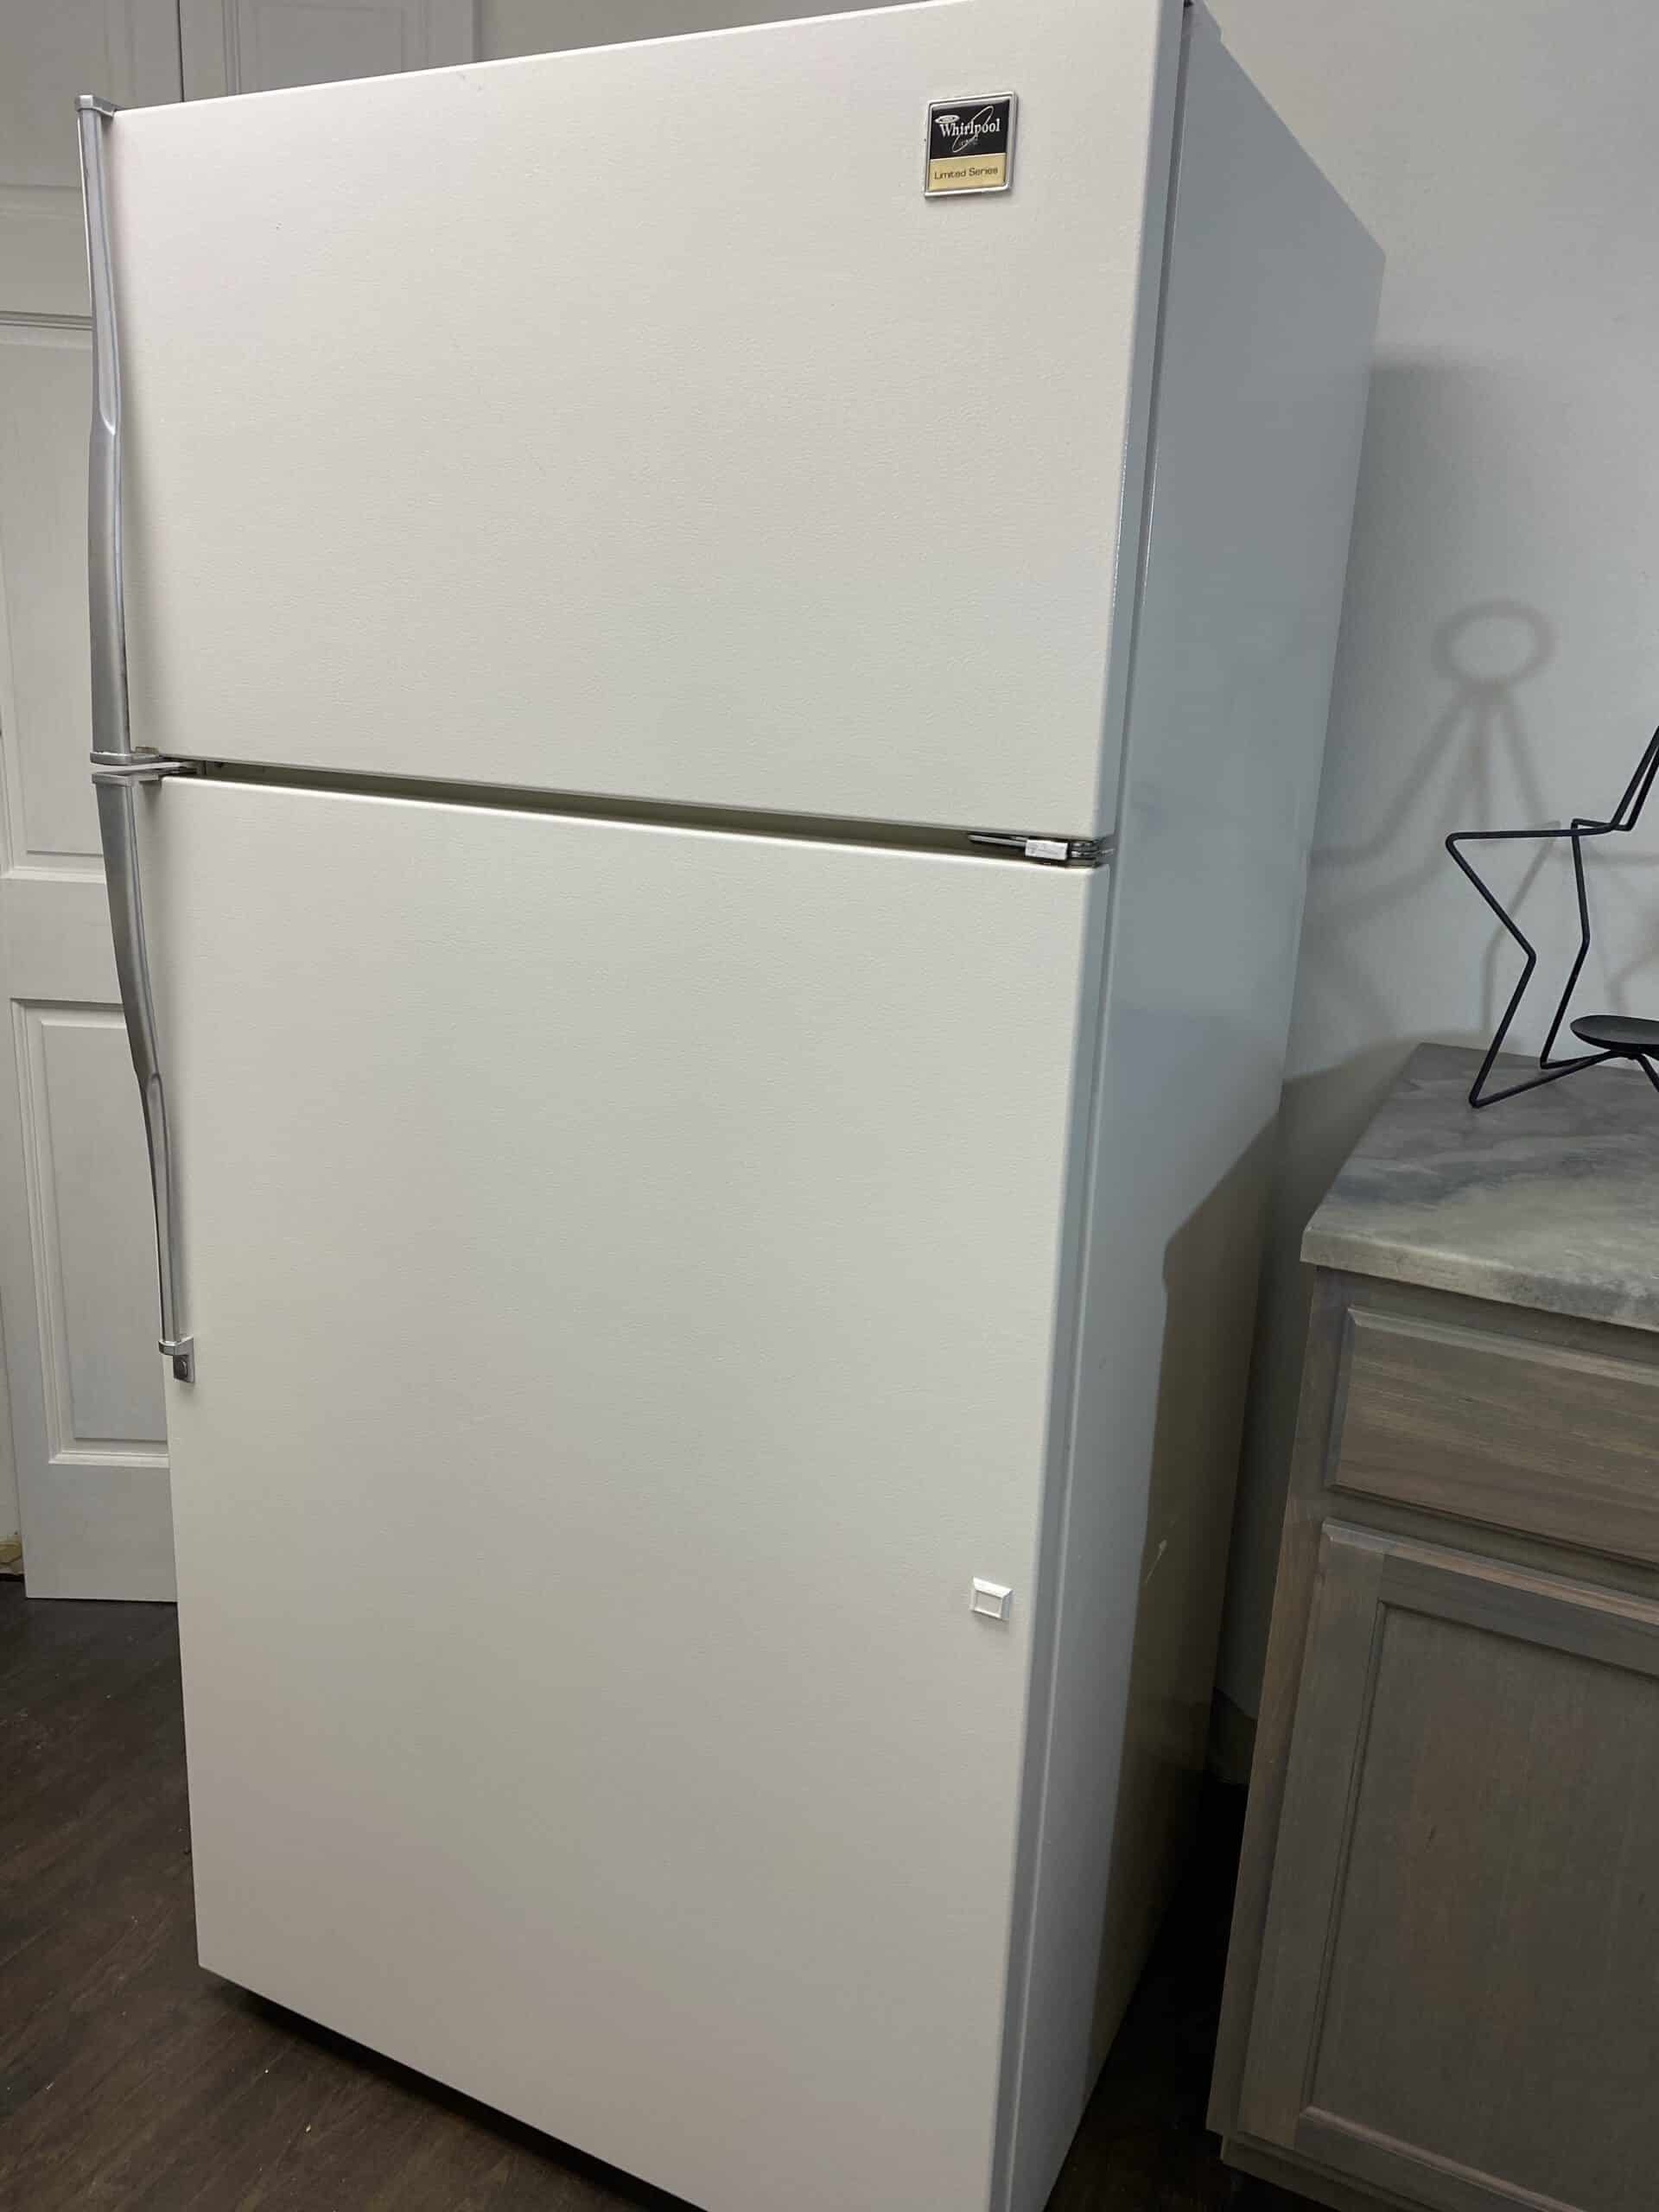 Painting an old refrigerator white